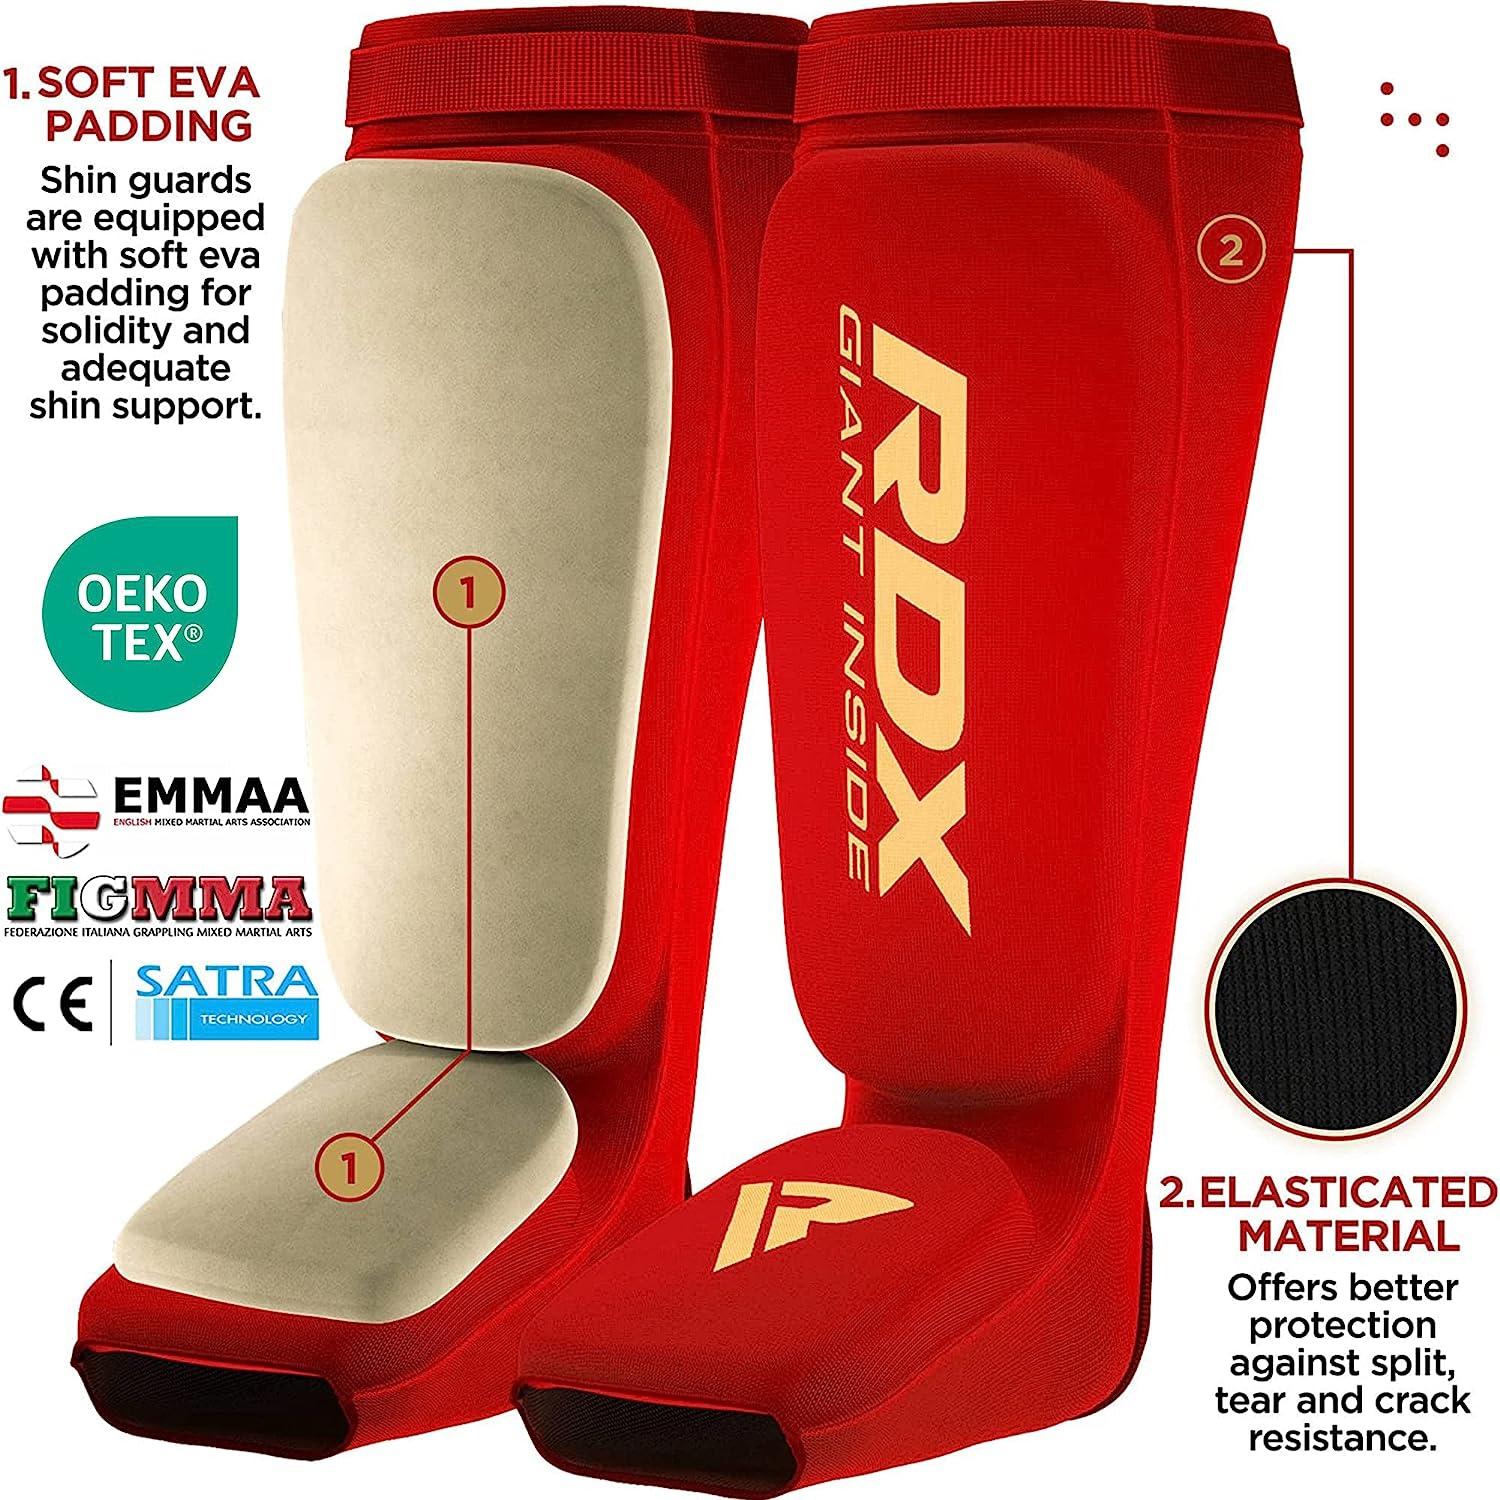 RDX SI Gel Padded Shin Guards Leg Instep Protection Pads for MMA, BJJ, Kickboxing, Muay Thai, Training - RED - EXTRA LARGE - Pro-Distributing